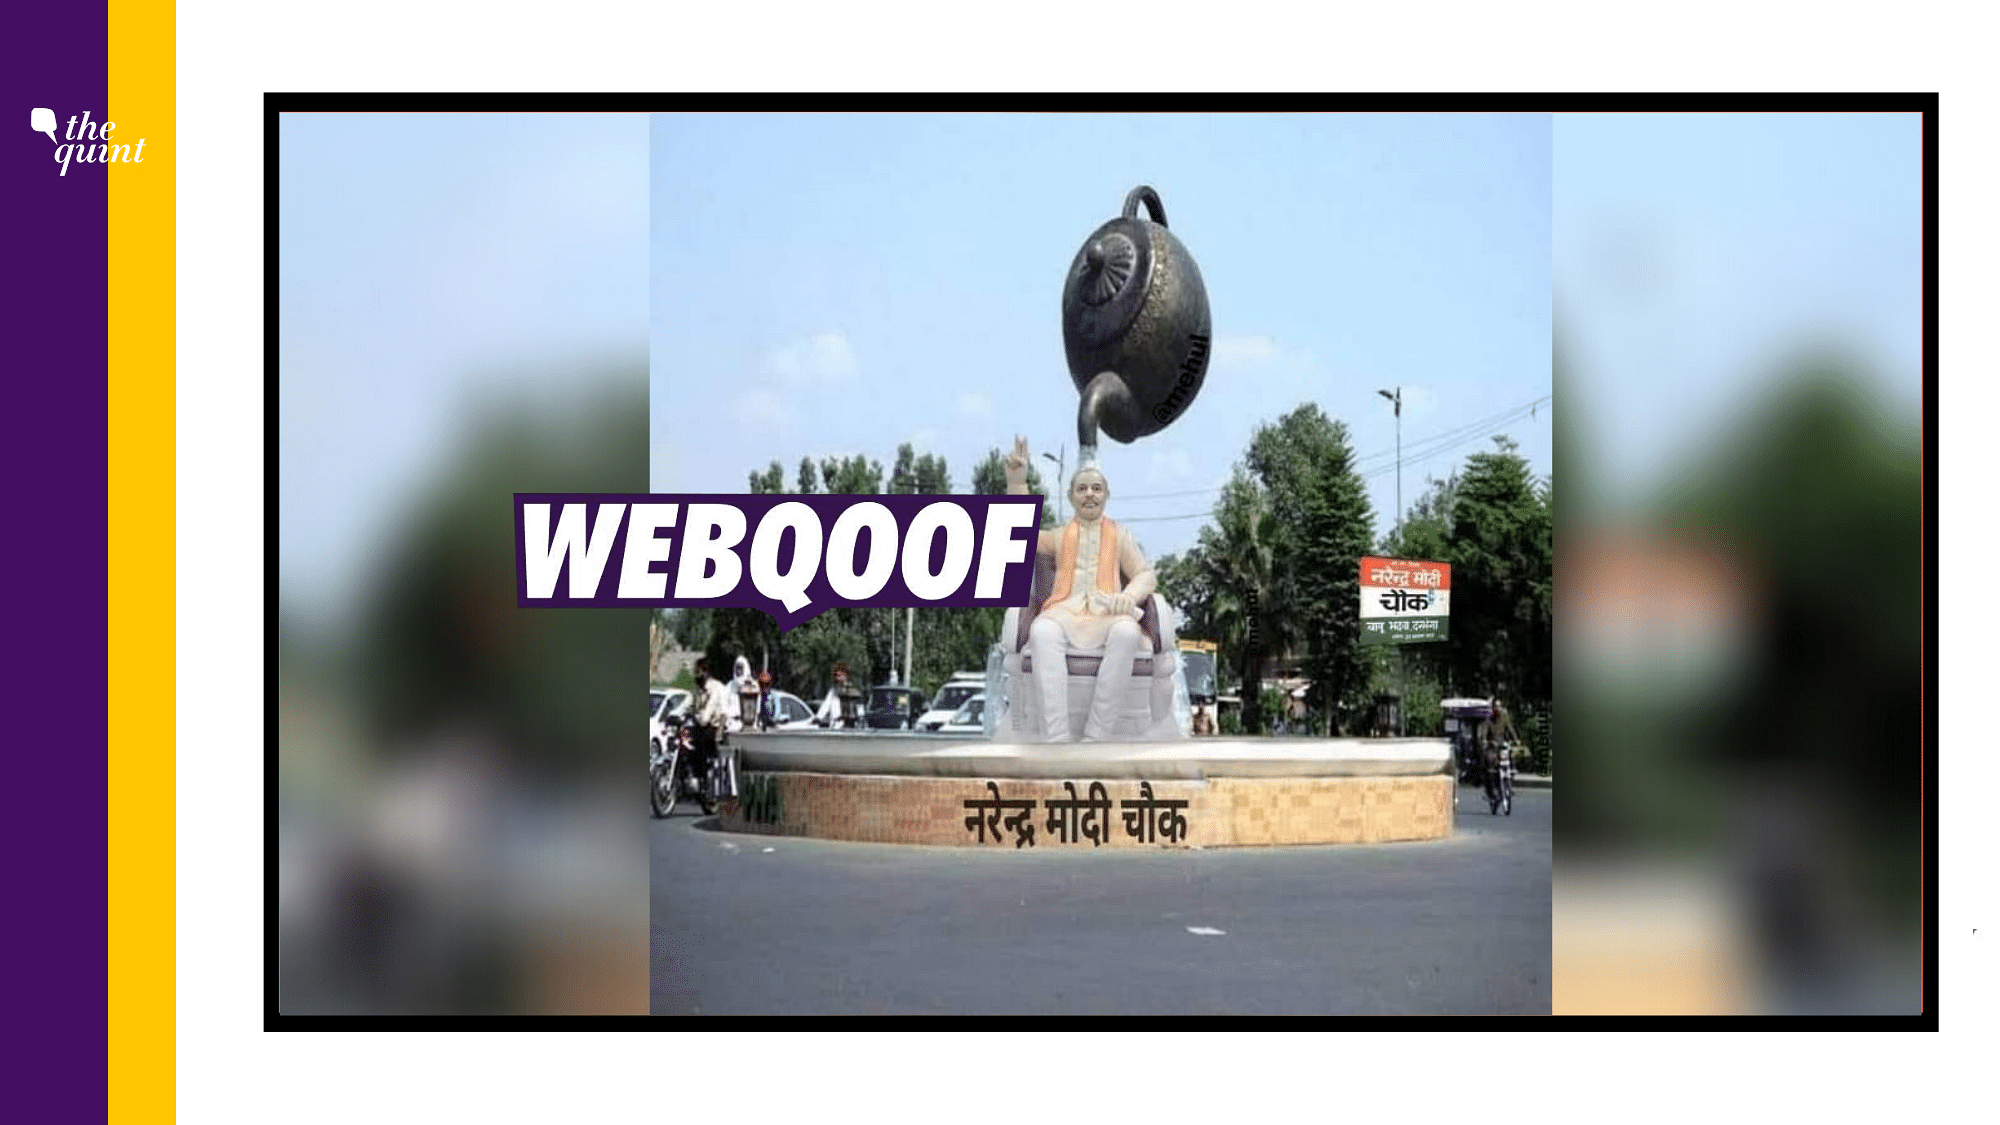 An image of PM Modi’s statue has been edited onto an image of a fountain in Faisalabad, Pakistan.